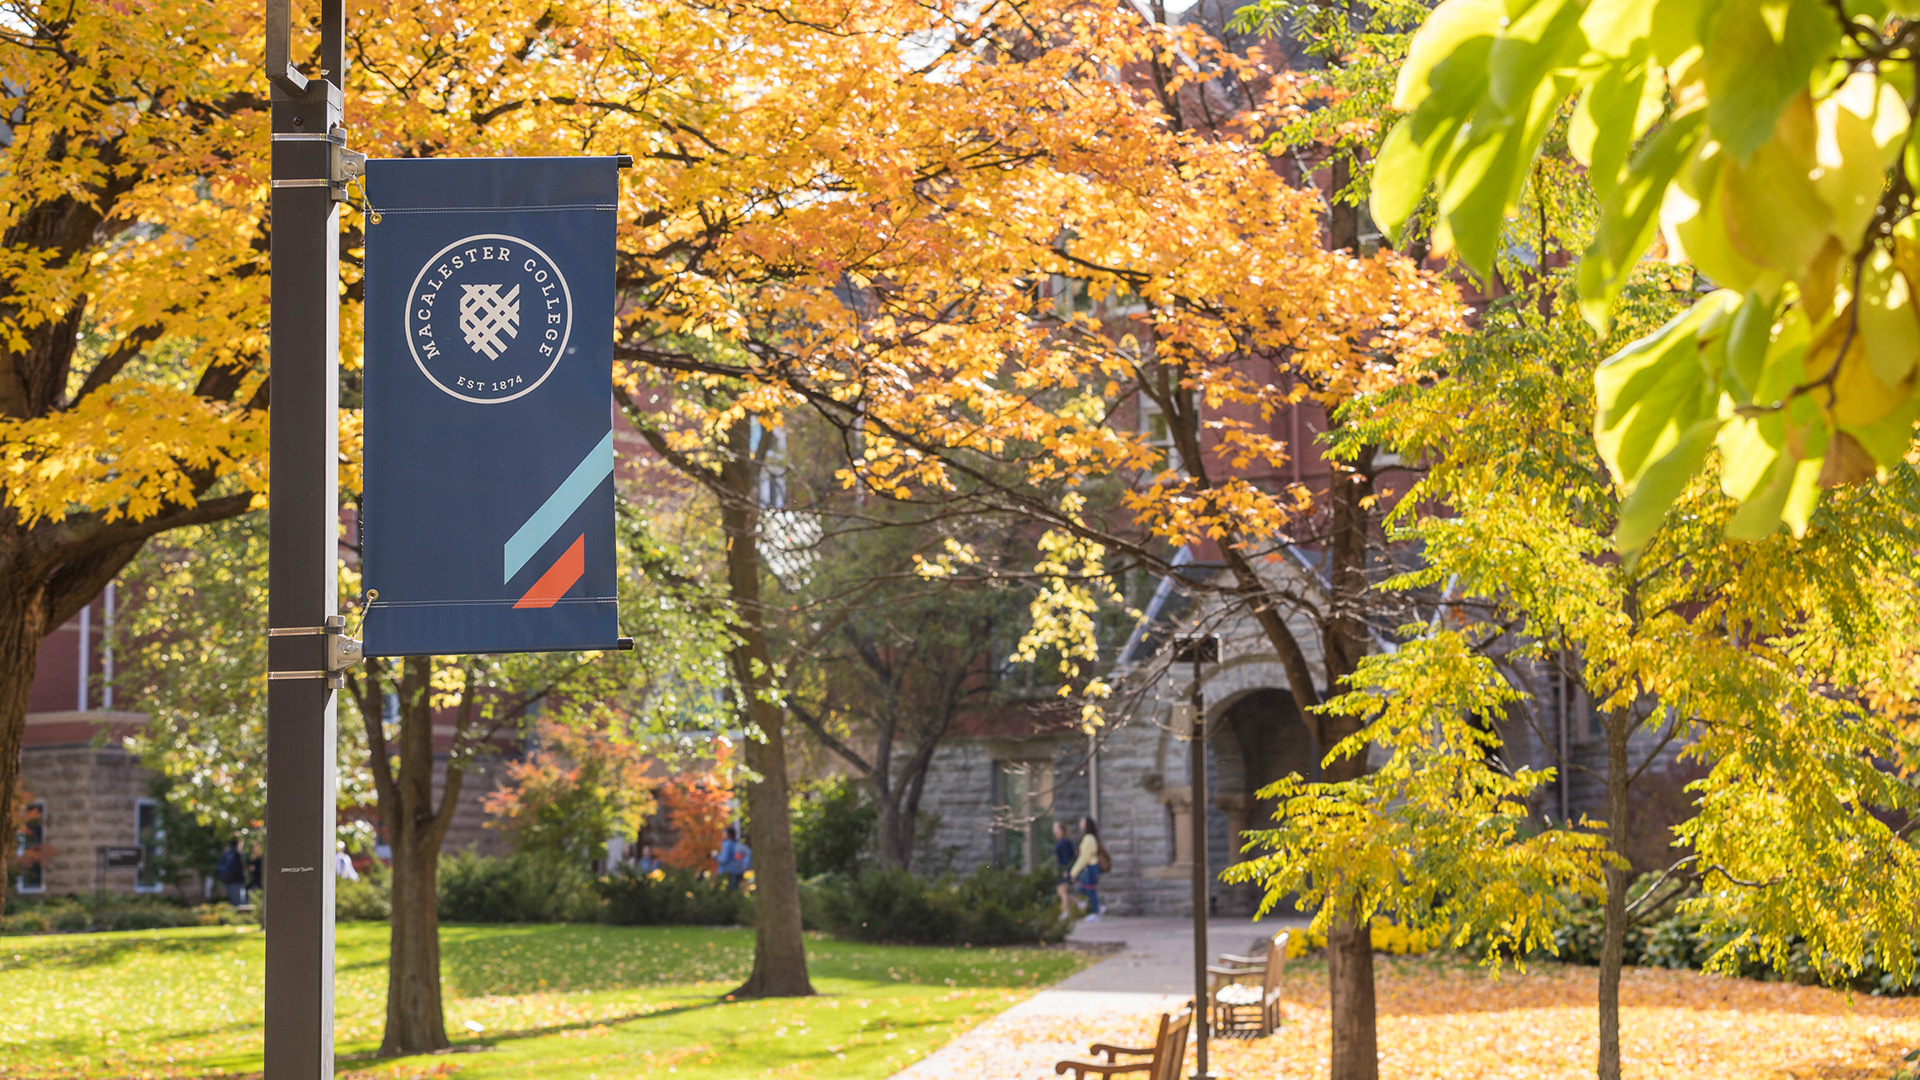 Macalester College adopts test-optional admissions policy - News -  Macalester College